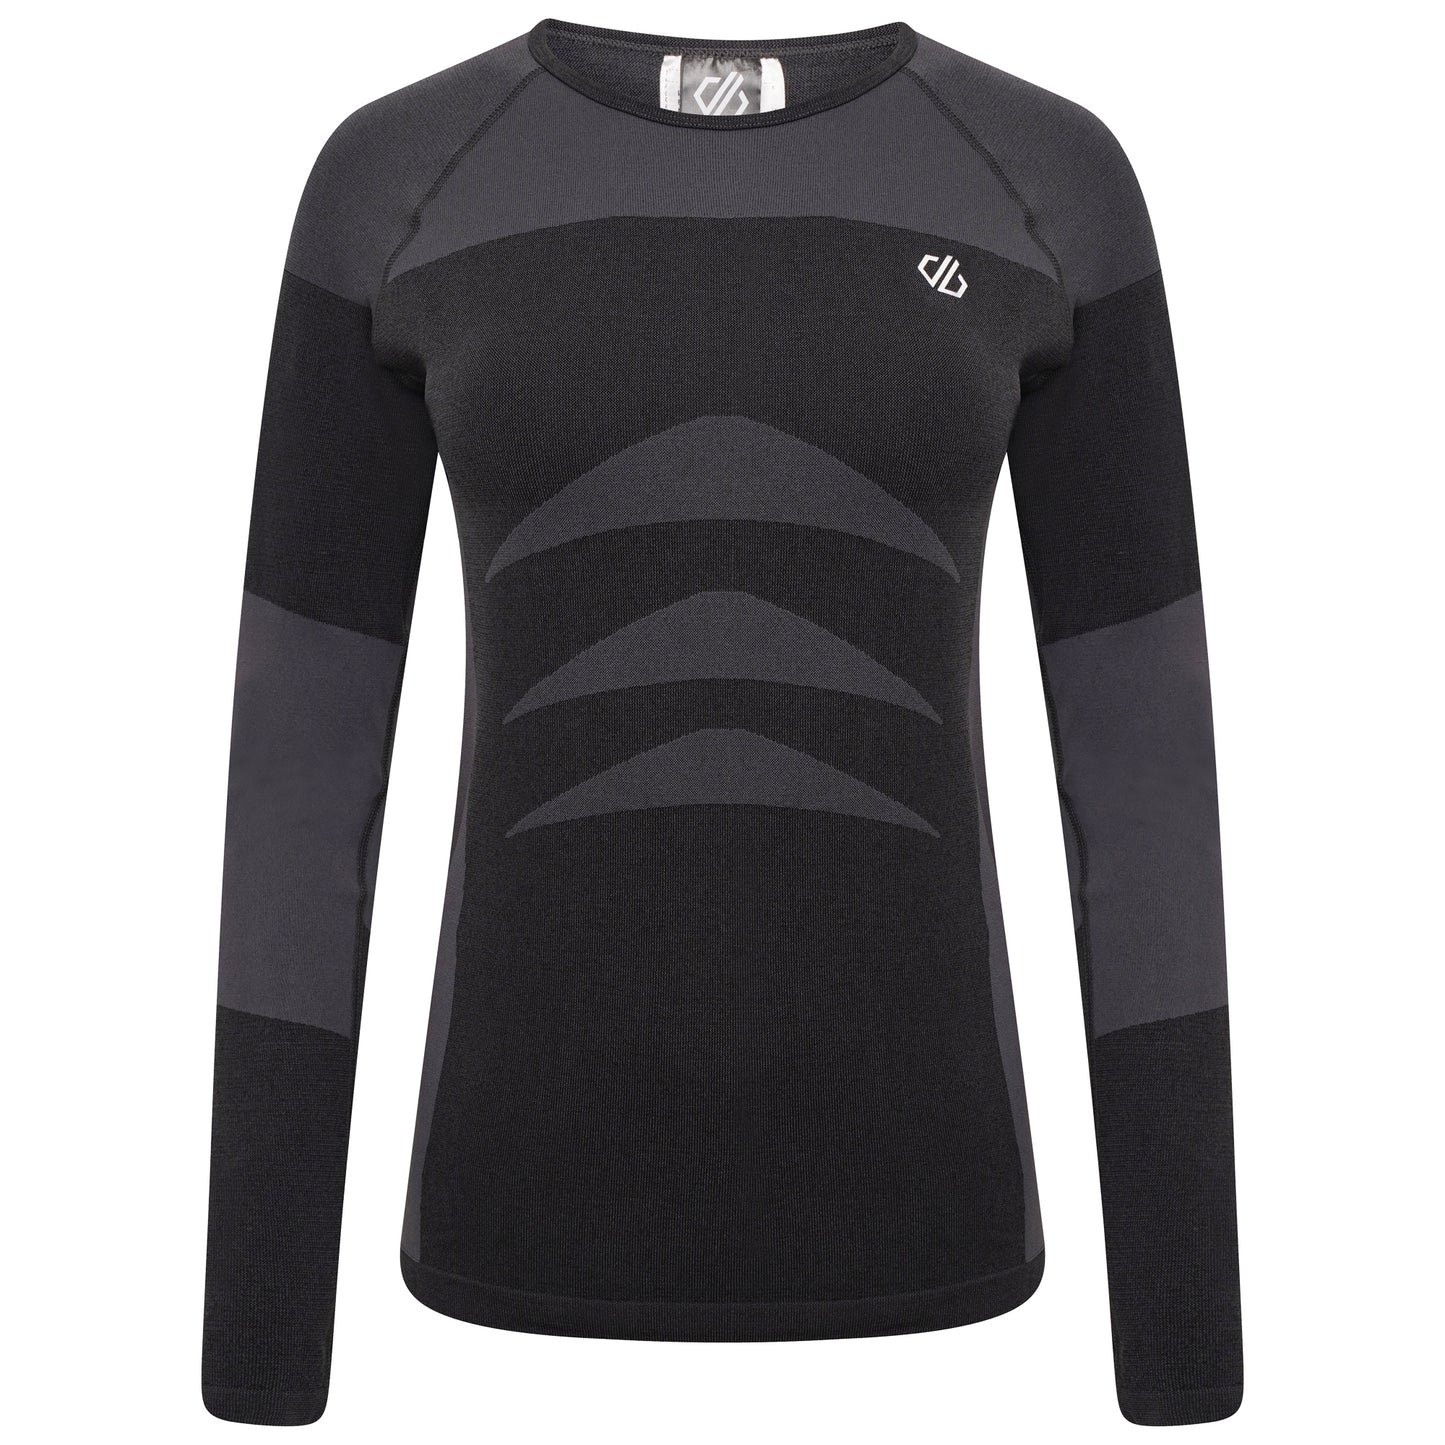 Women's In The Zone Performance Base Layer Set | Black